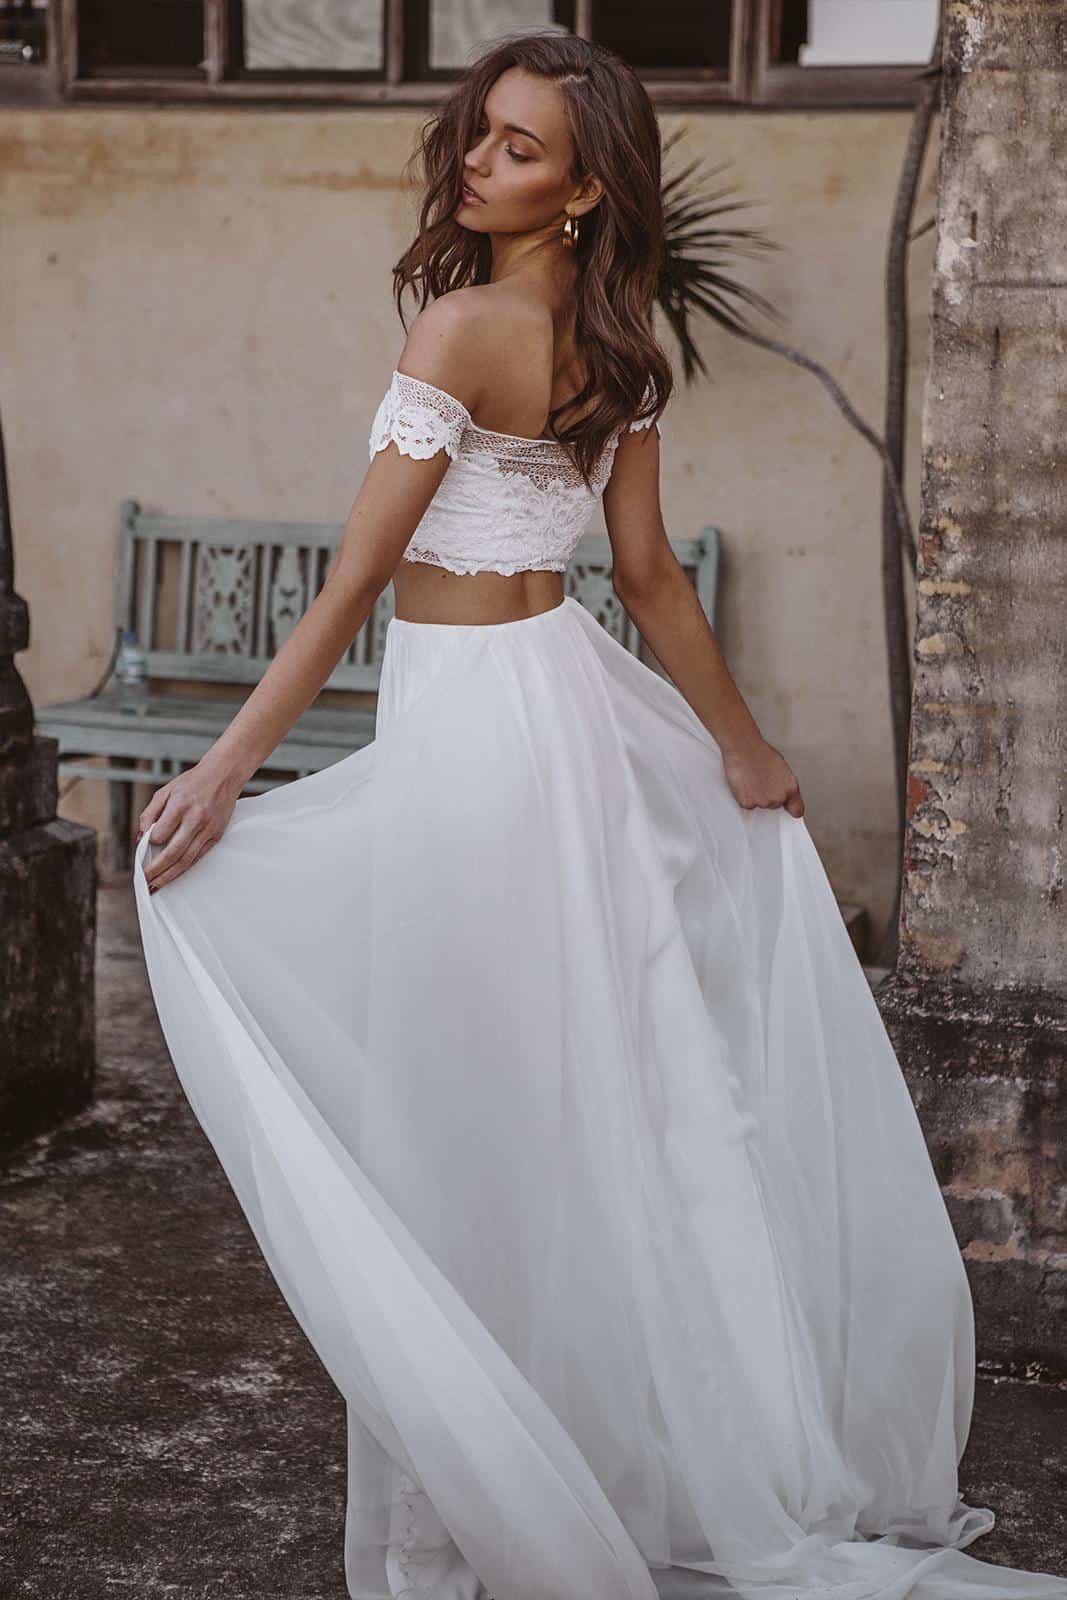 Bohemian Wedding Dress Inspiration | French Lace Bridal Gowns